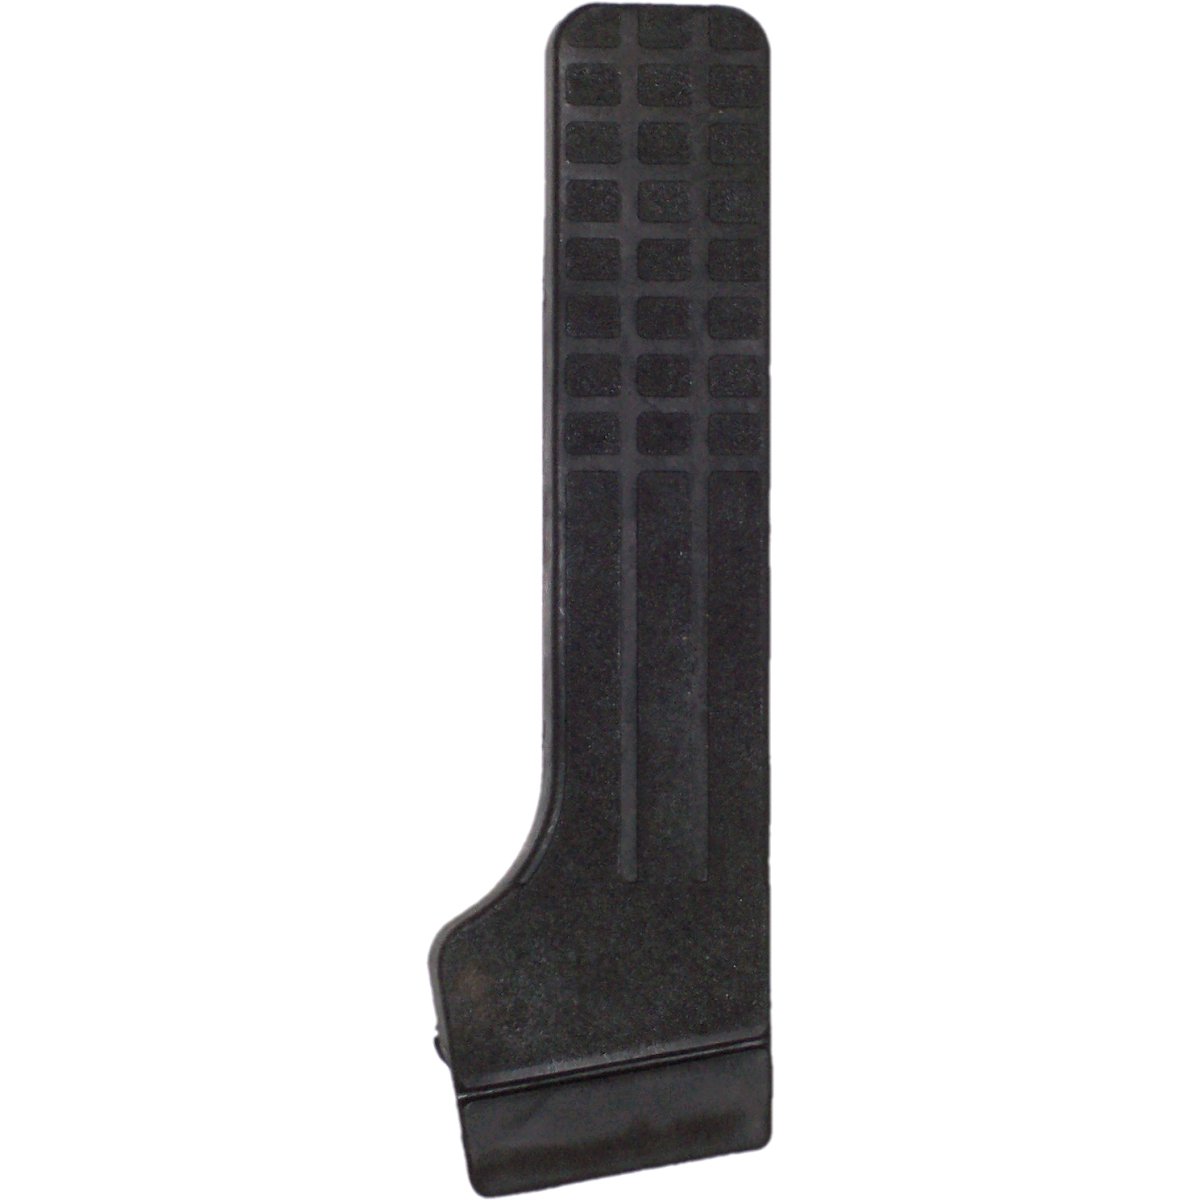 BROTHERS Accelerator Pedal Pad C4039-67